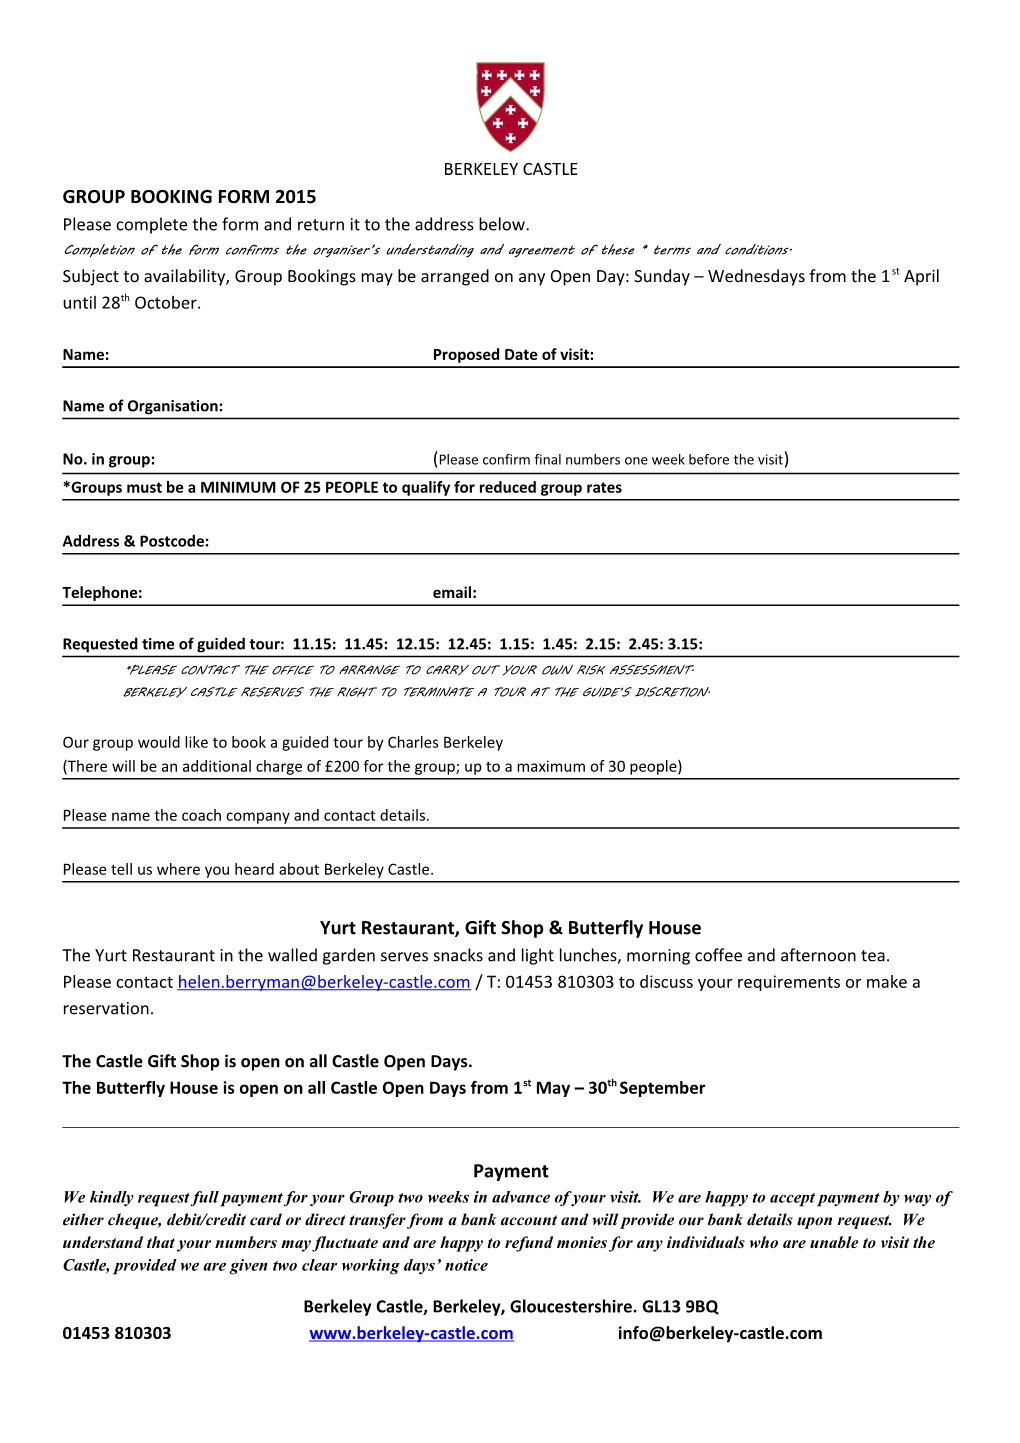 Group Booking Form 2015